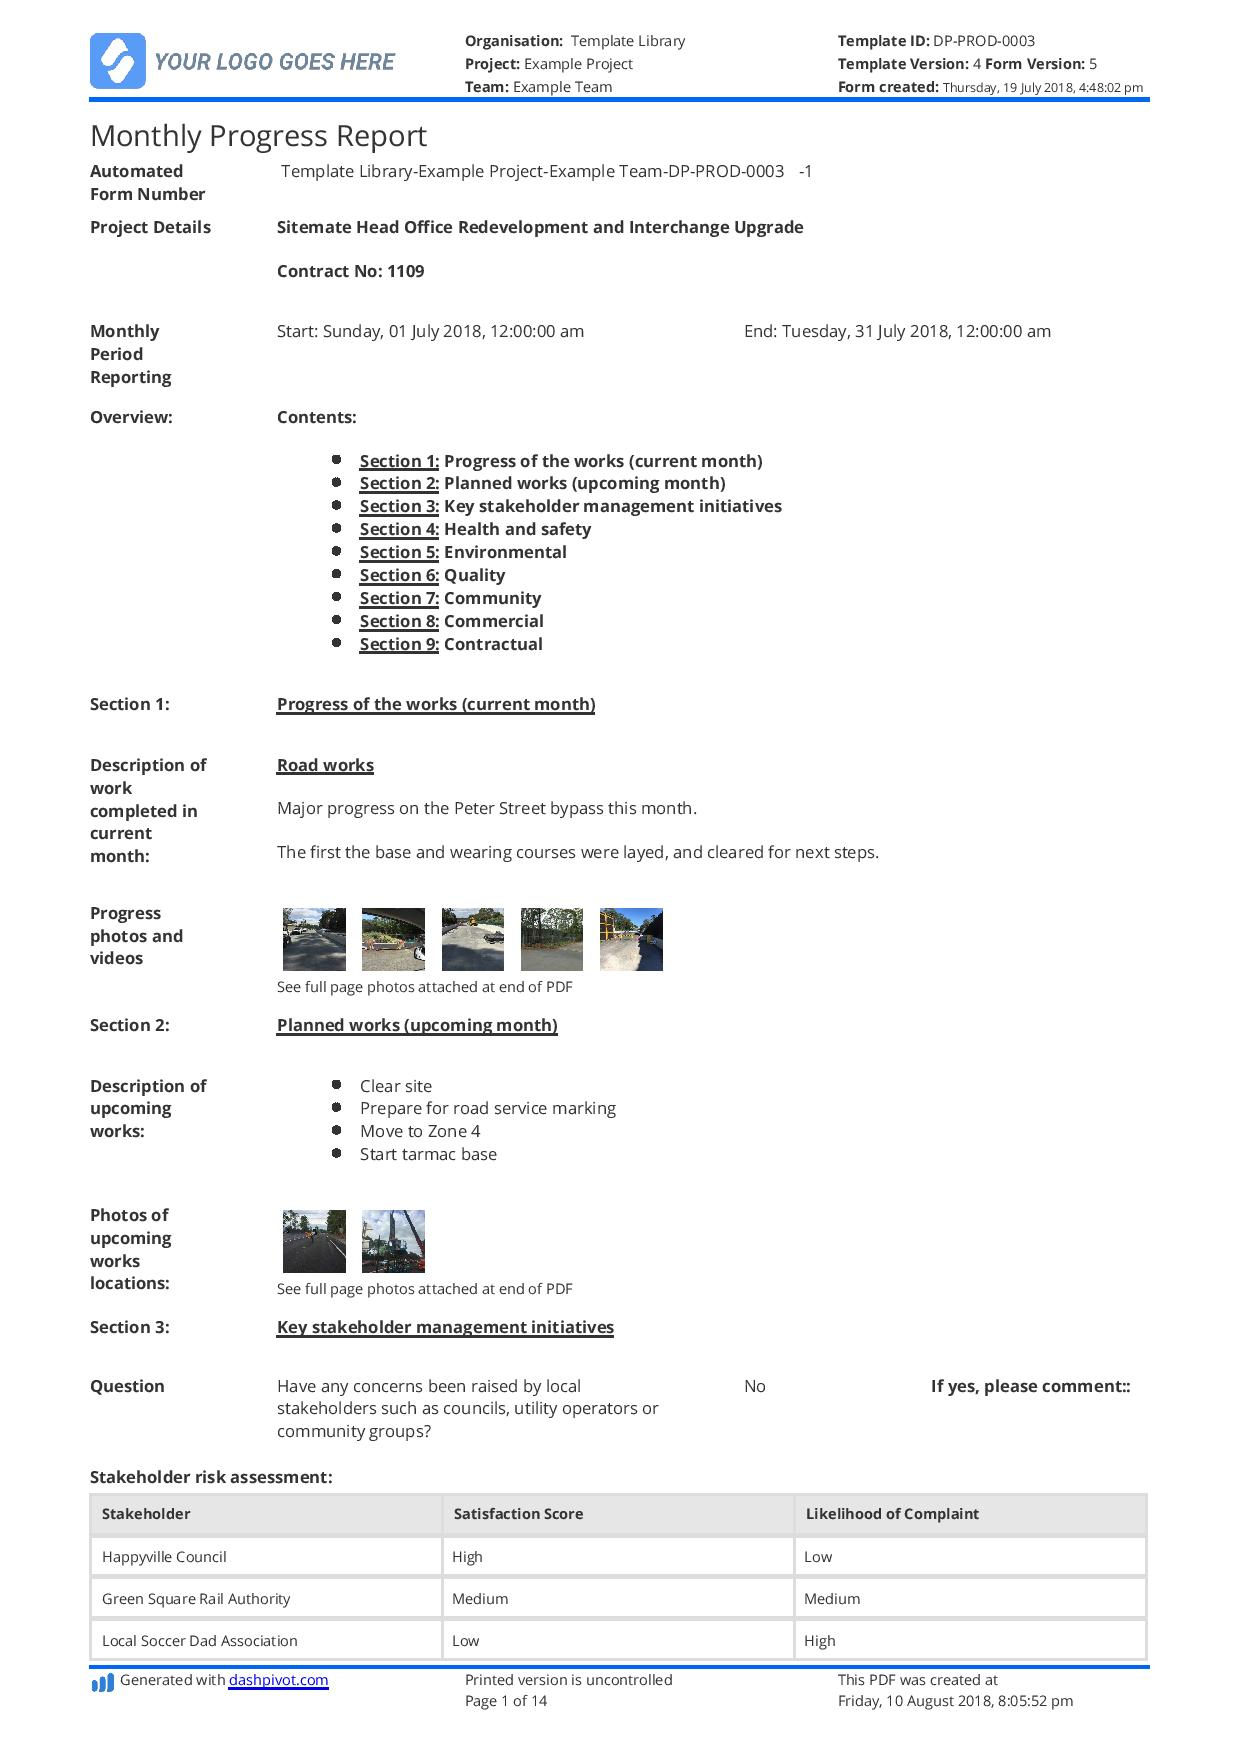 Monthly Construction Progress Report Template: Use This For Monthly Health And Safety Report Template